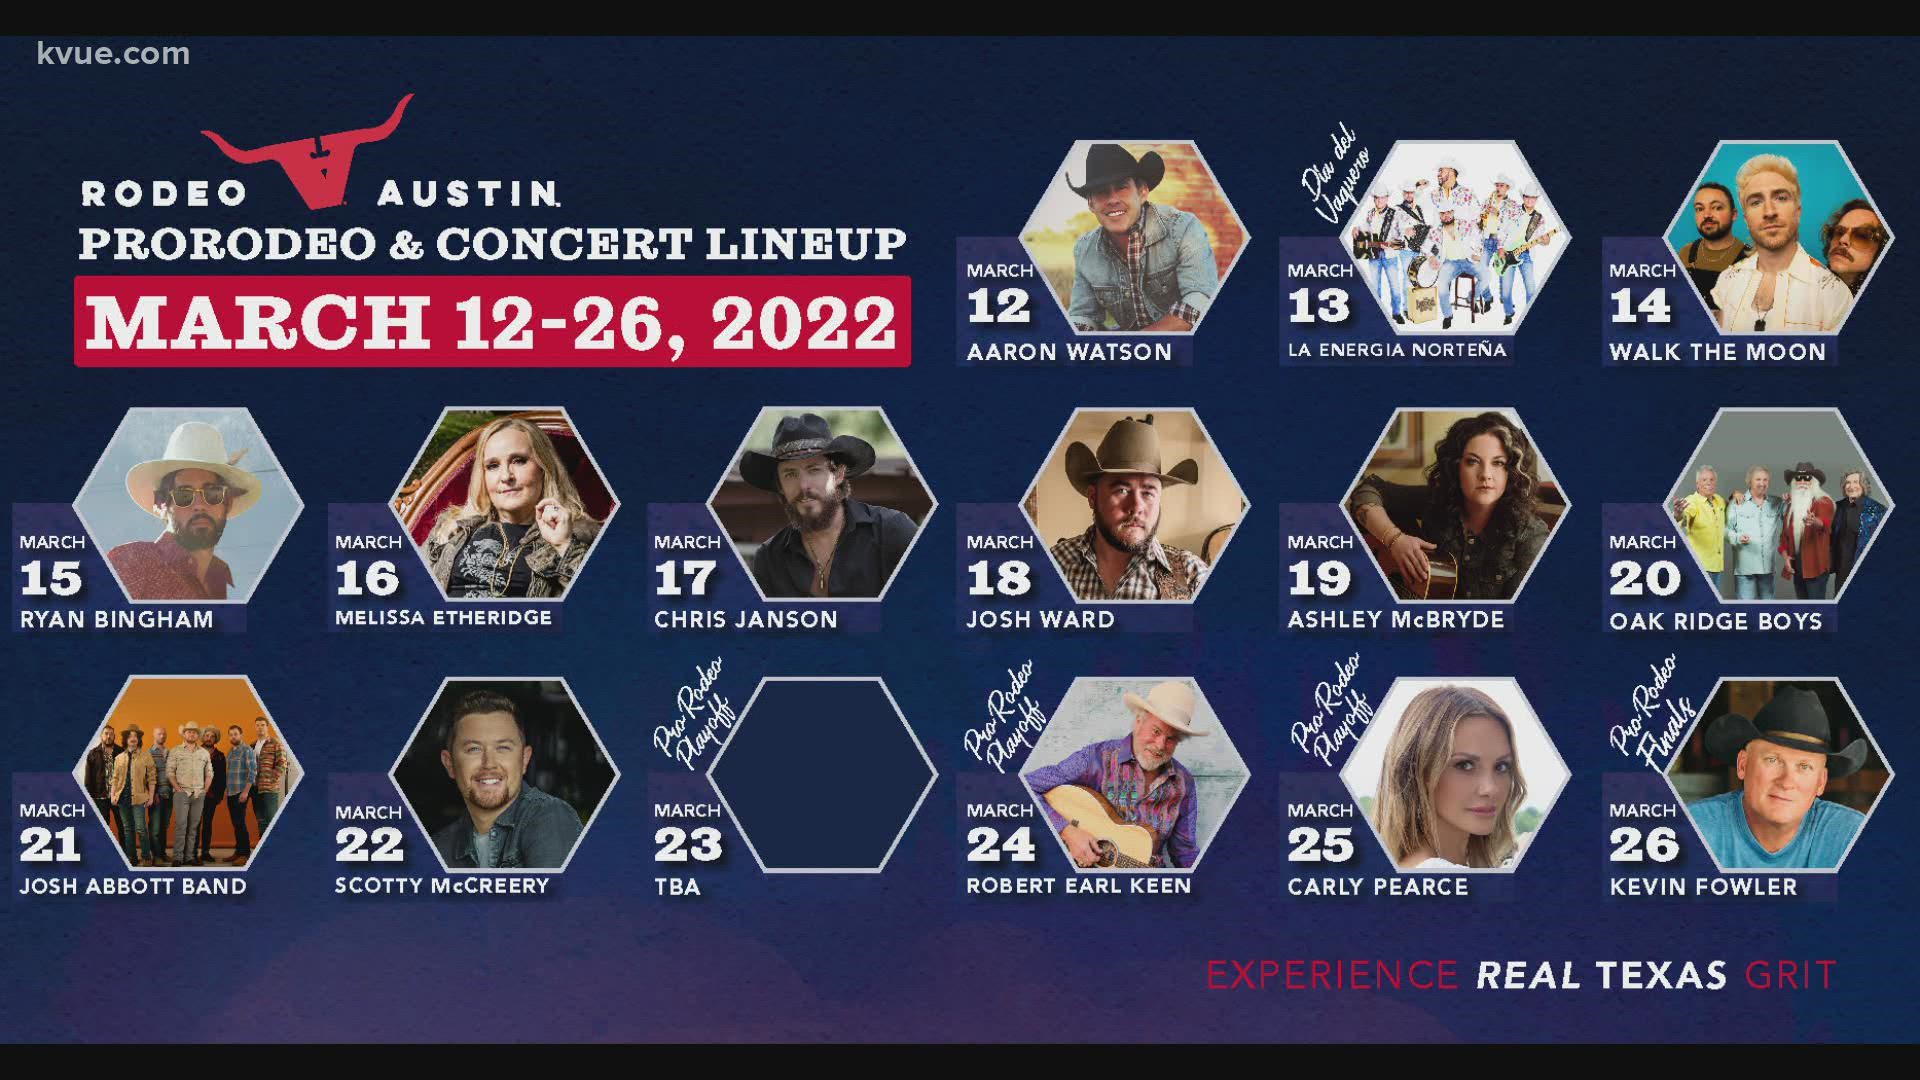 Texas country stars Robert Earl Keen, Kevin Fowler and Josh Abbott Band are among the artists playing this year's rodeo.